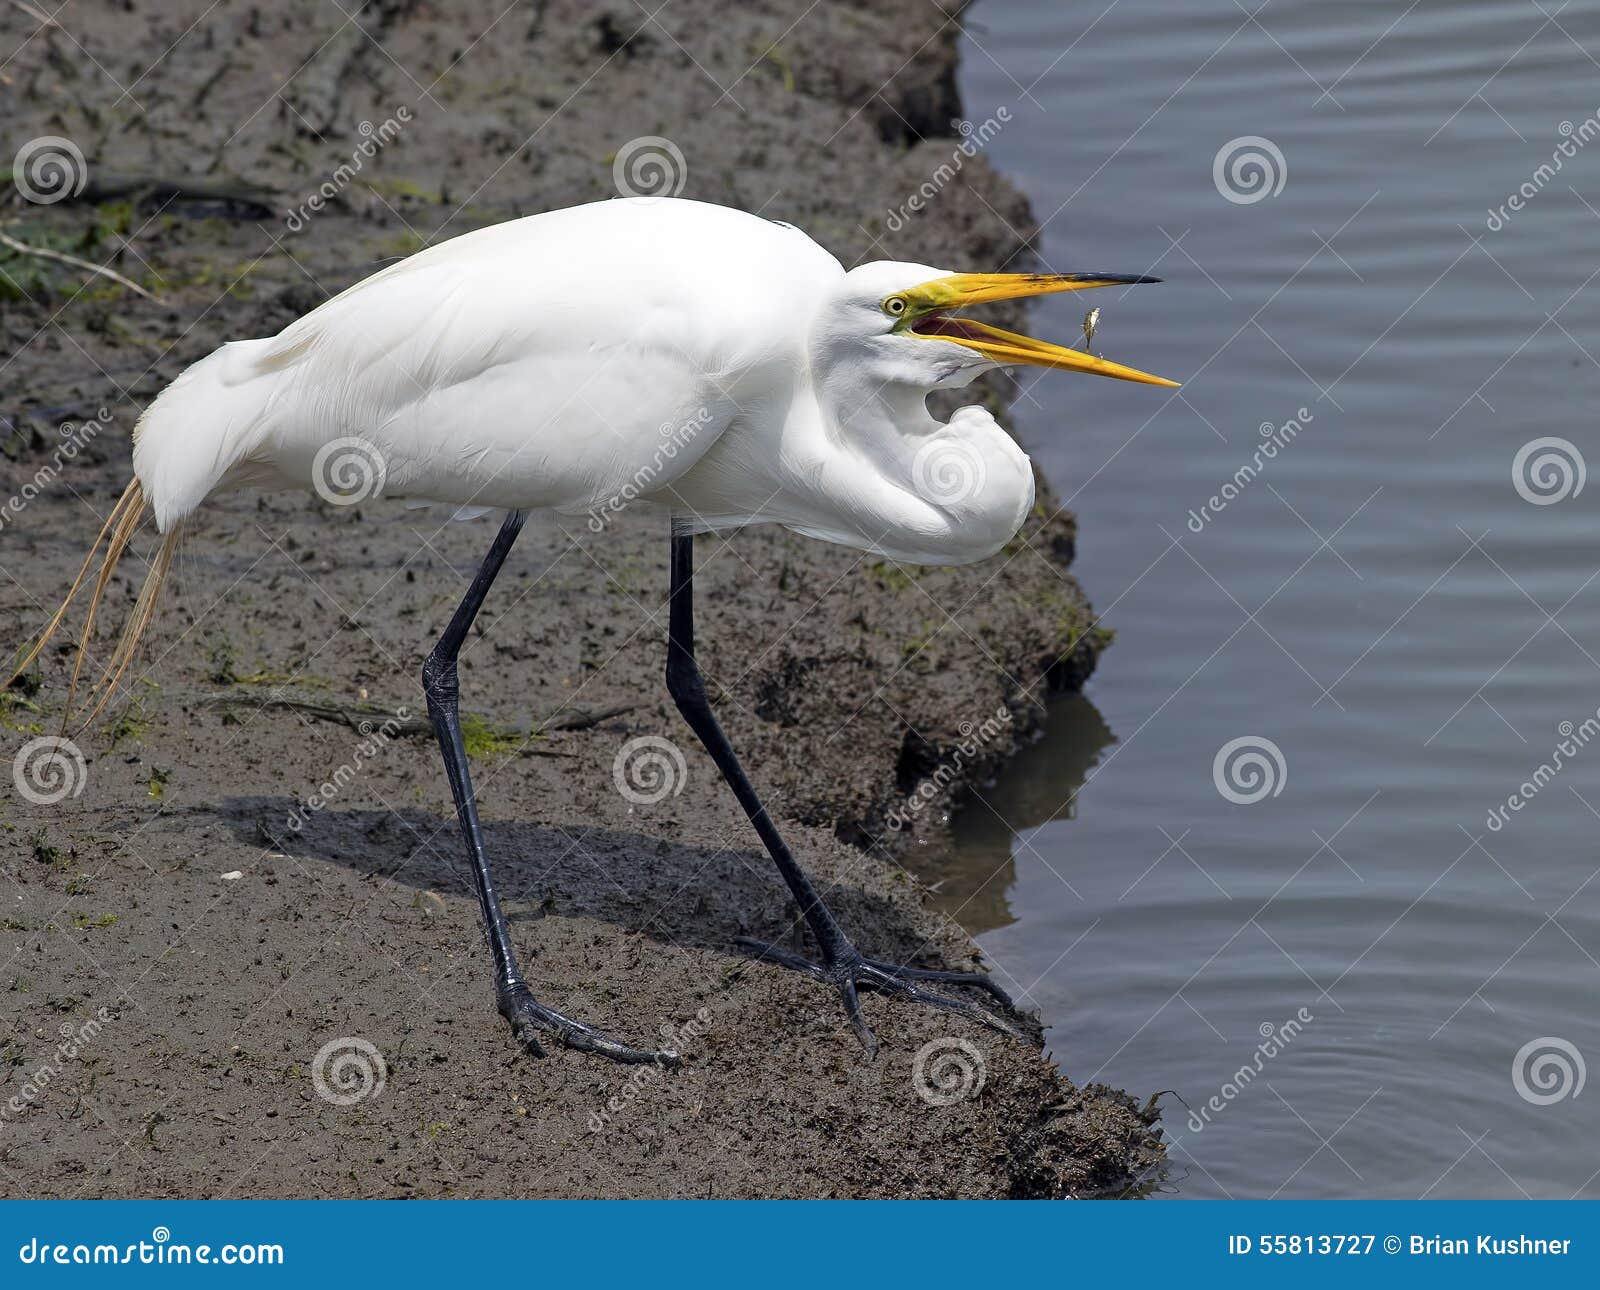 Great Egret with Fish stock image. Image of eating, avian - 55813727